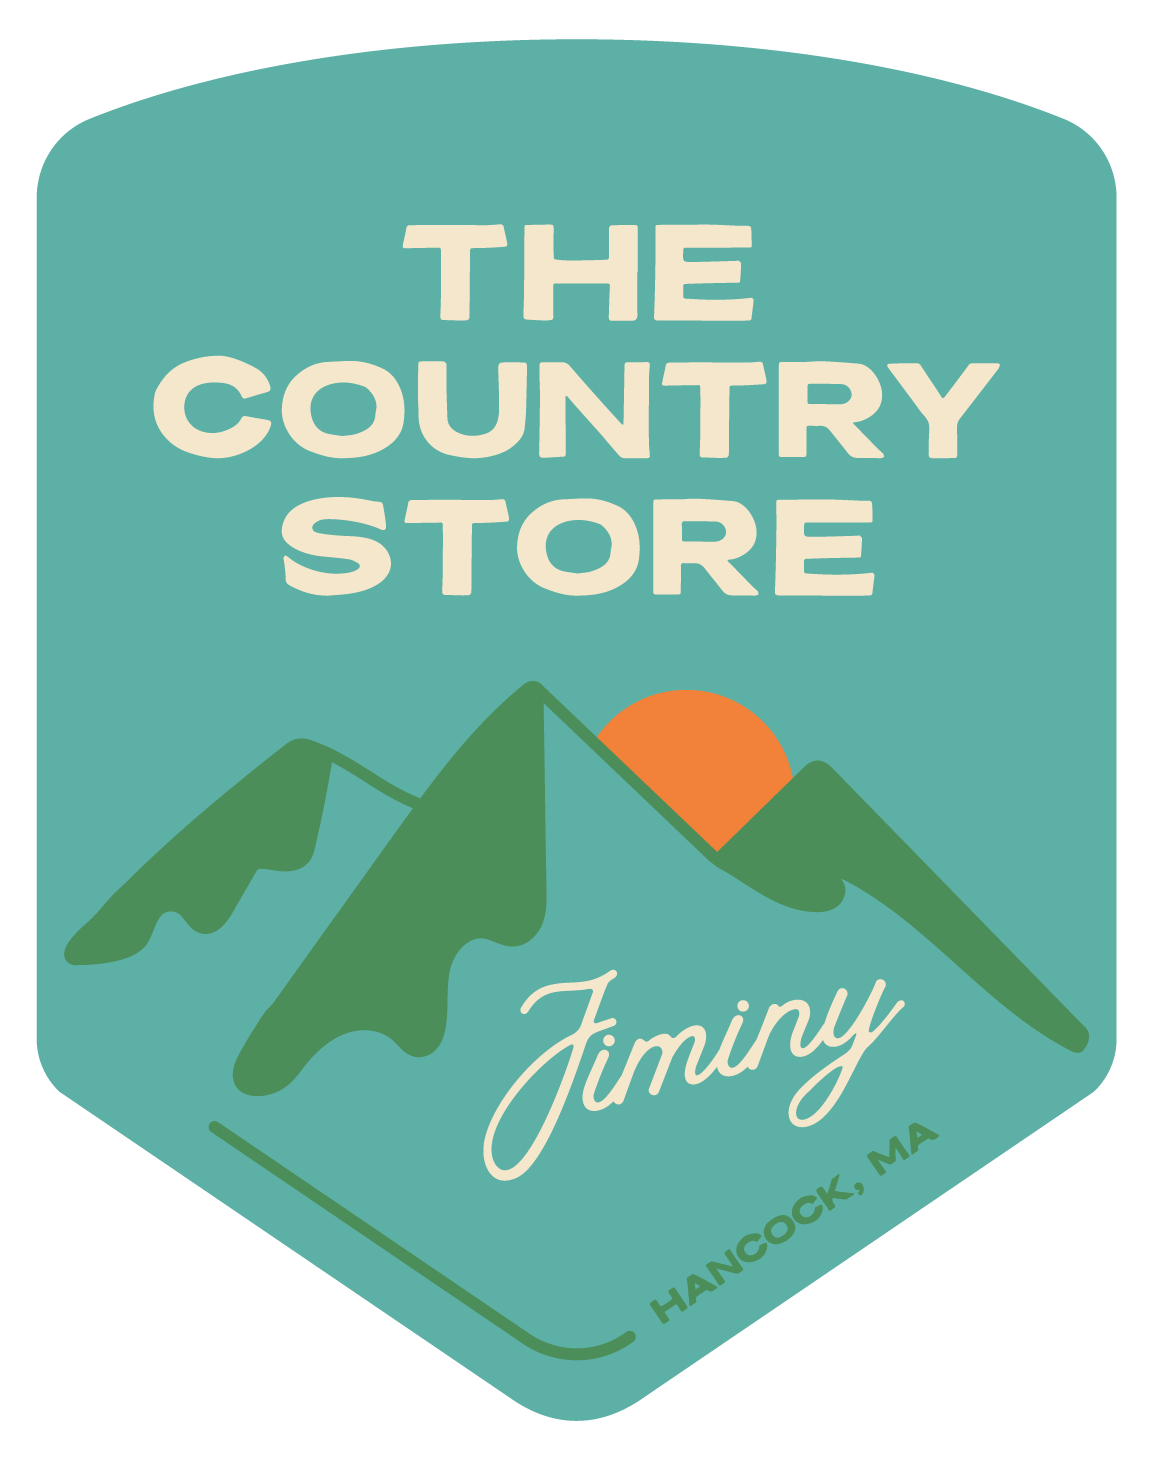 The Country Store @ Jiminy